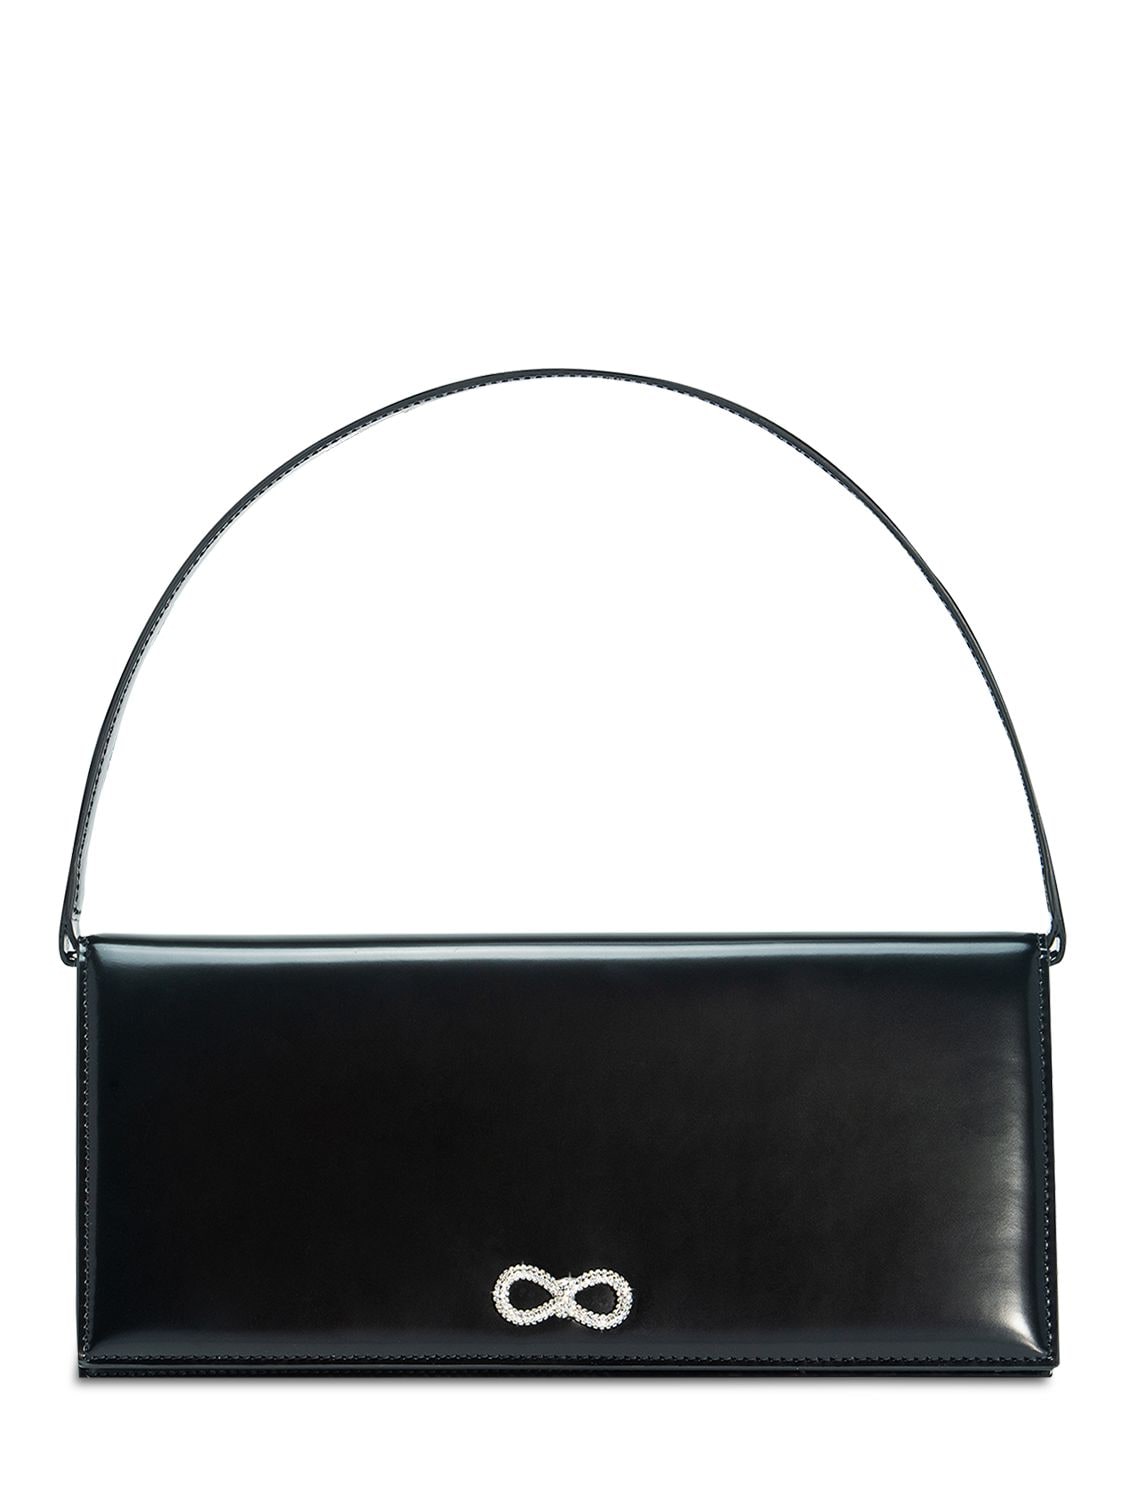 MACH & MACH Crystal Bow Leather Baguette Bag